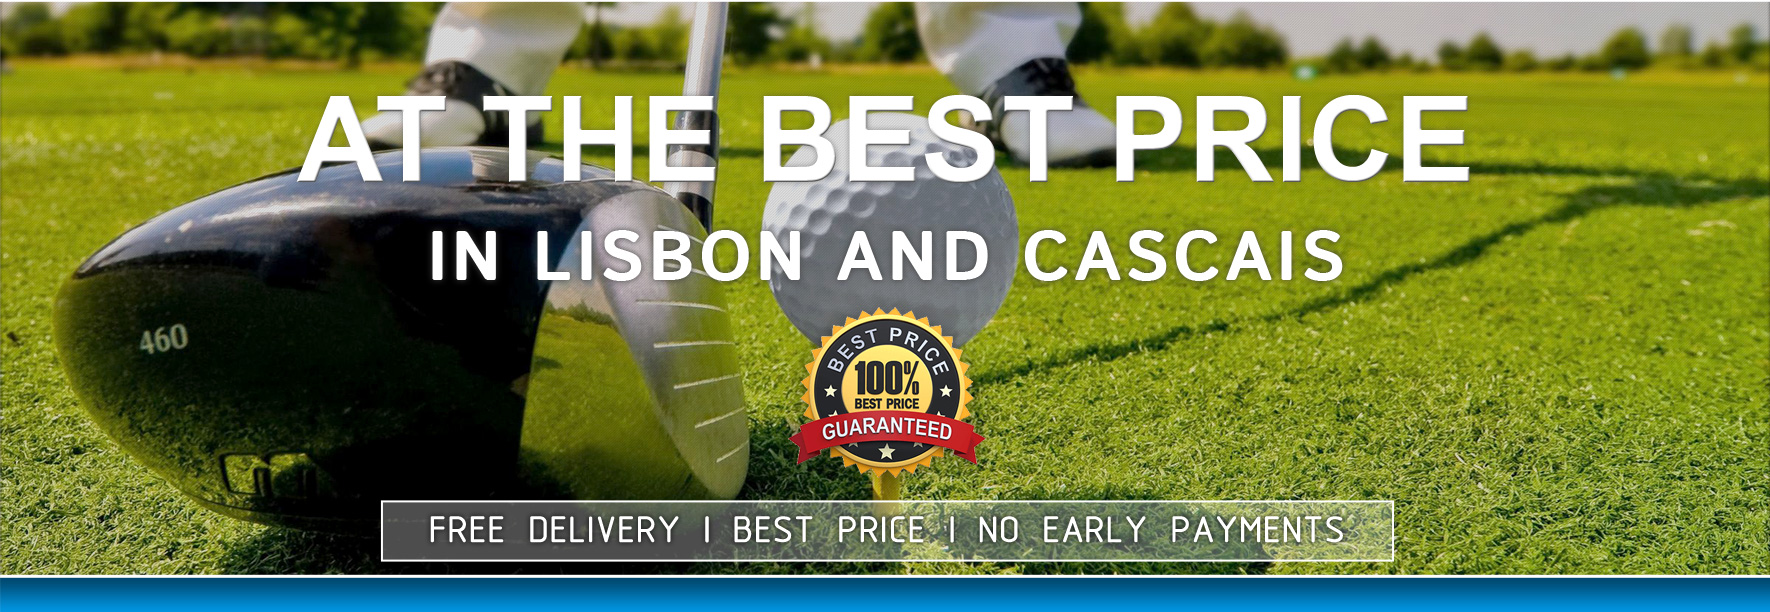 At the Best Price, in Lisbon and Cascais, Free Deliver, Golf Clubs Rental